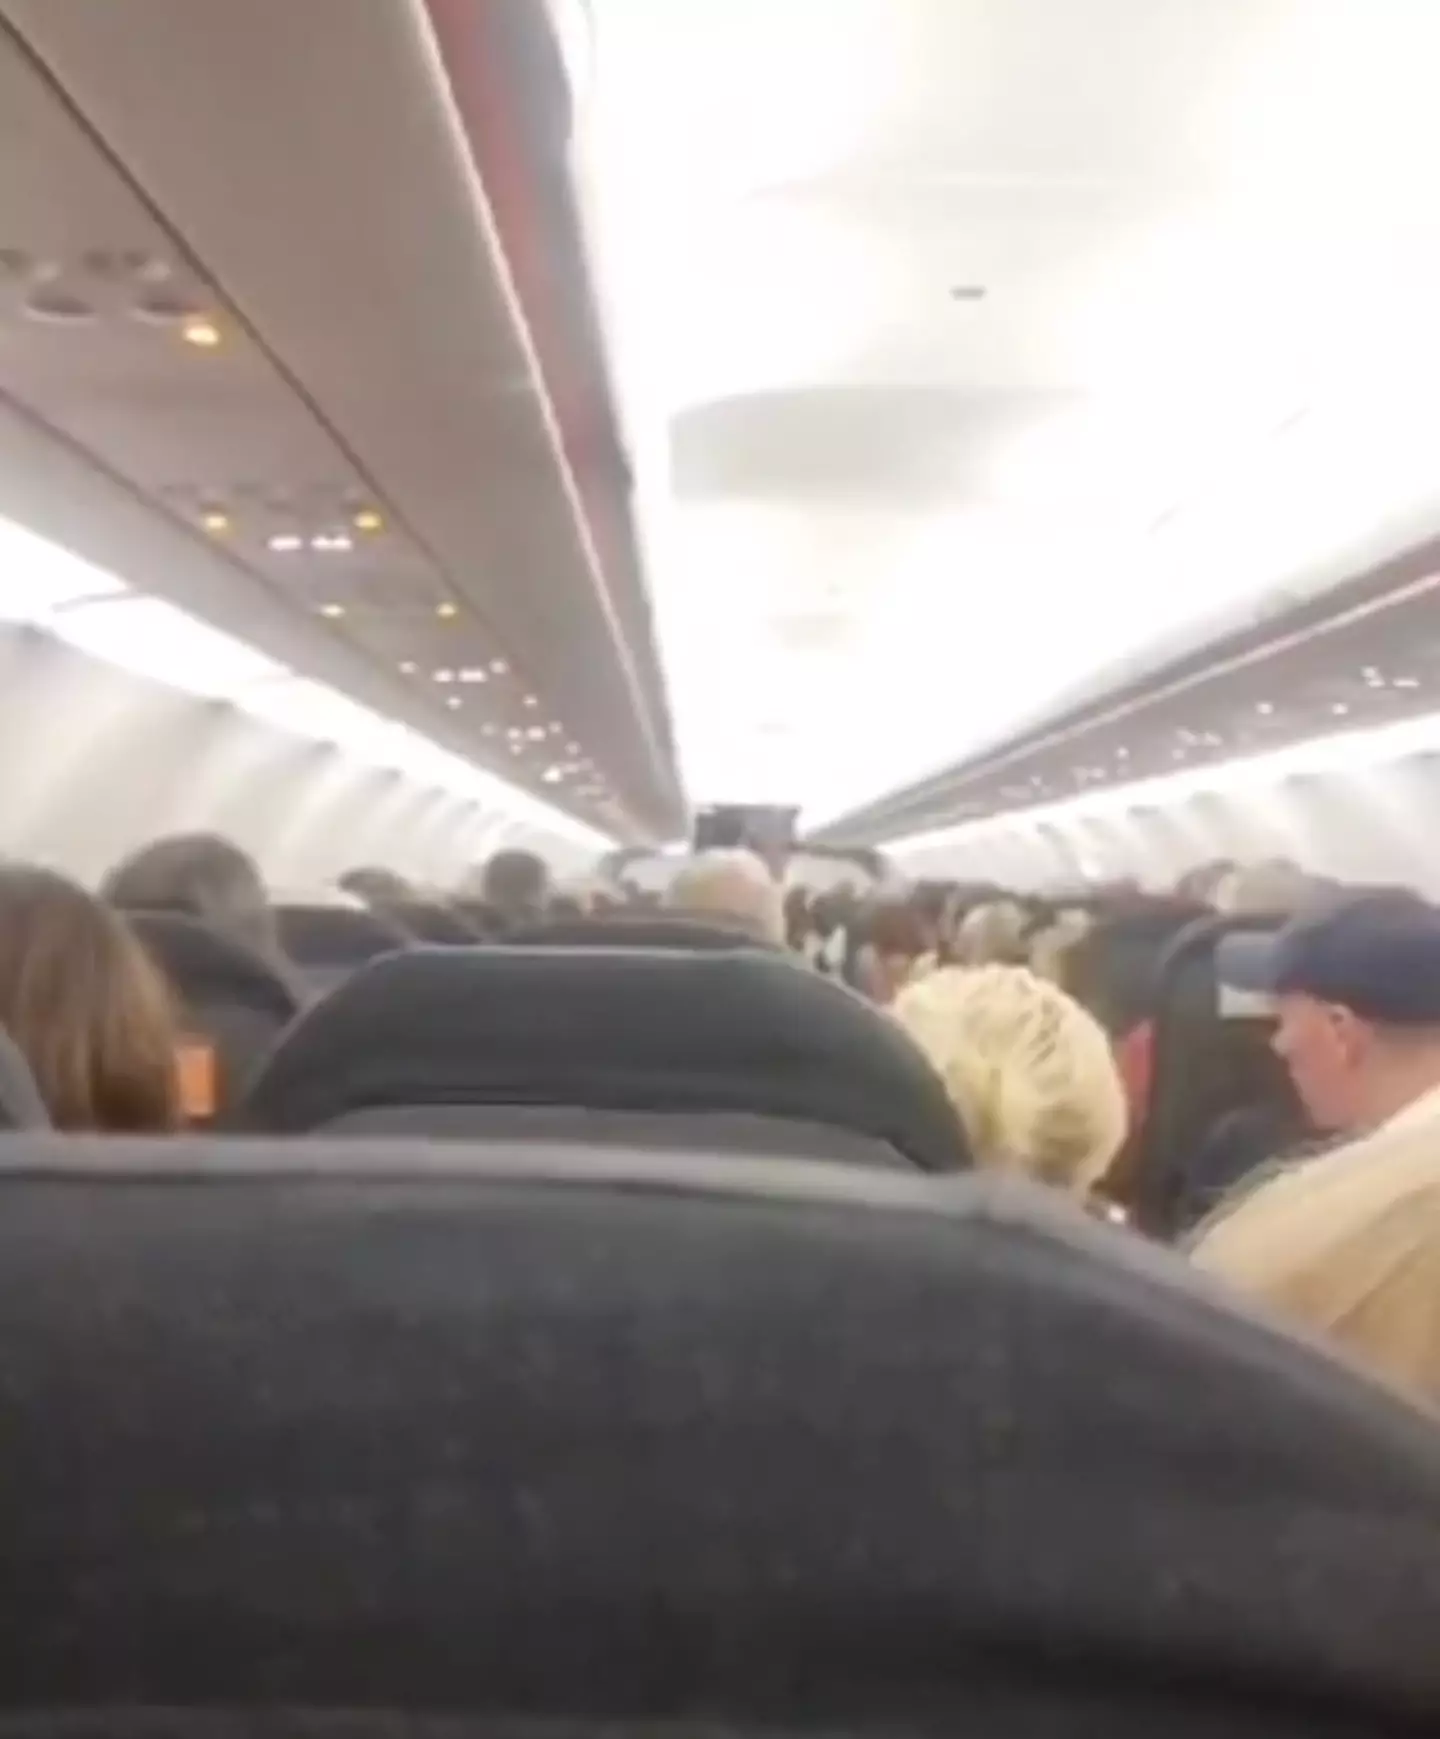 Passengers were told that some would have to get off in order for the flight to take off.